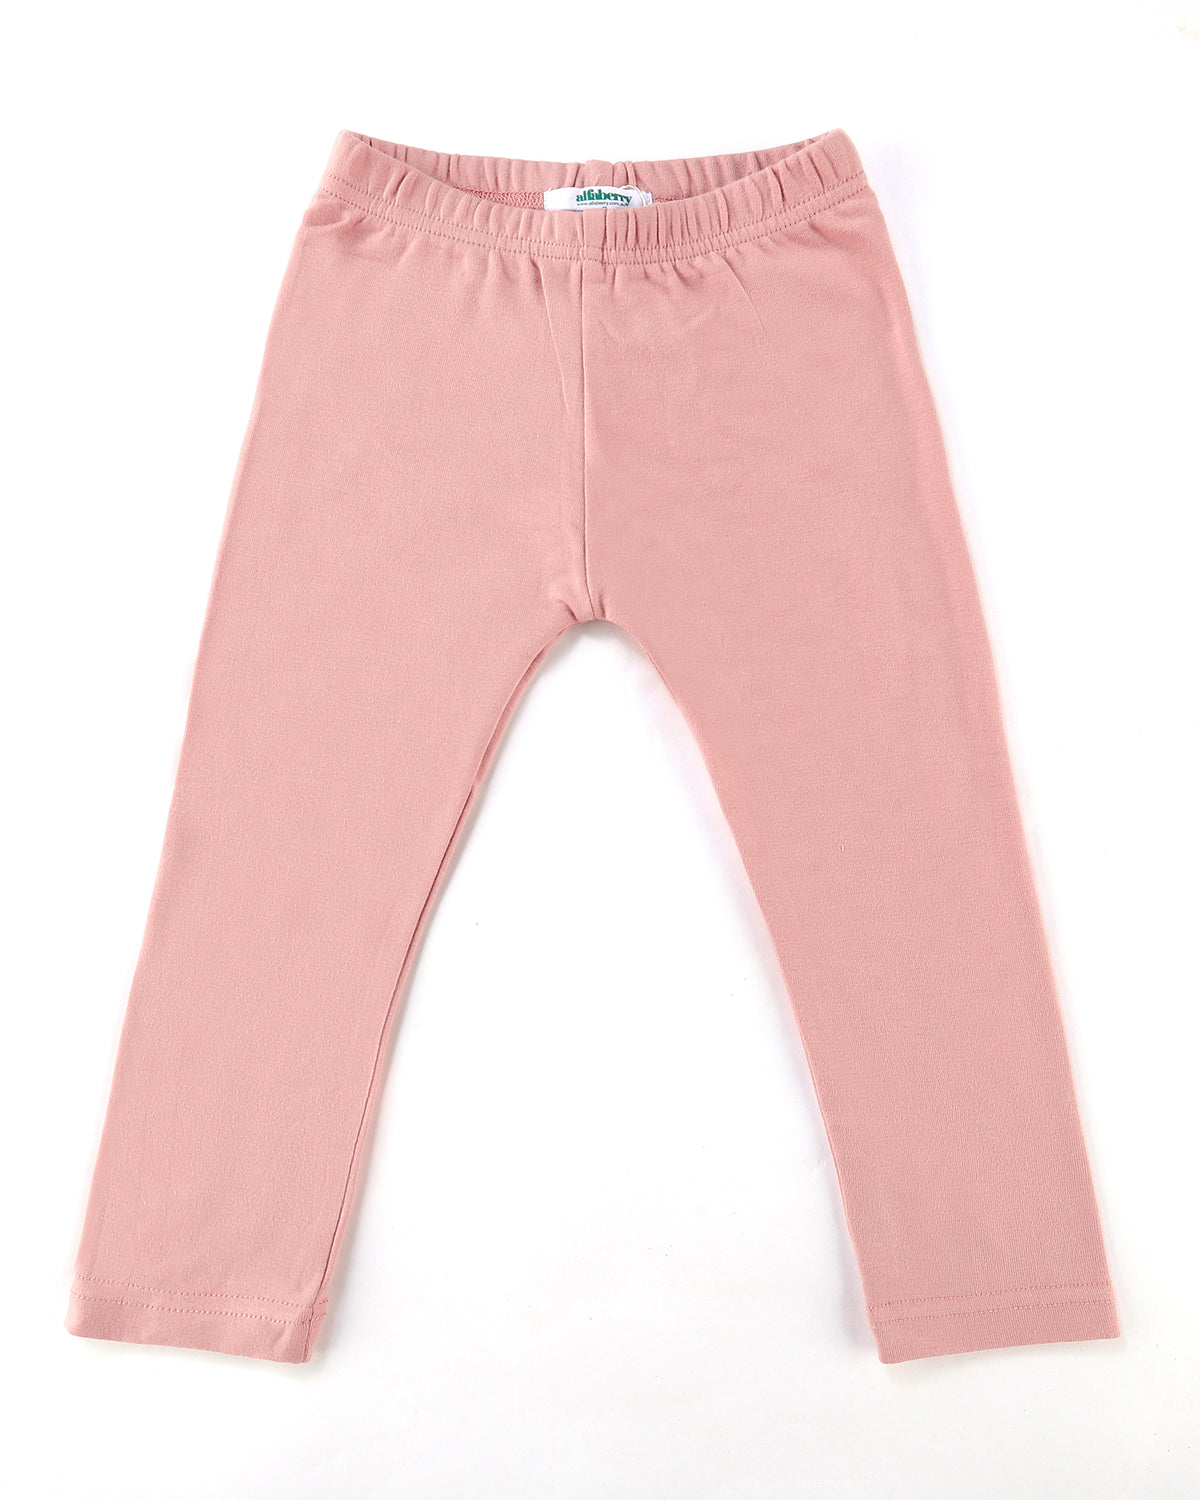 Here to stay Leggings In Pink Front